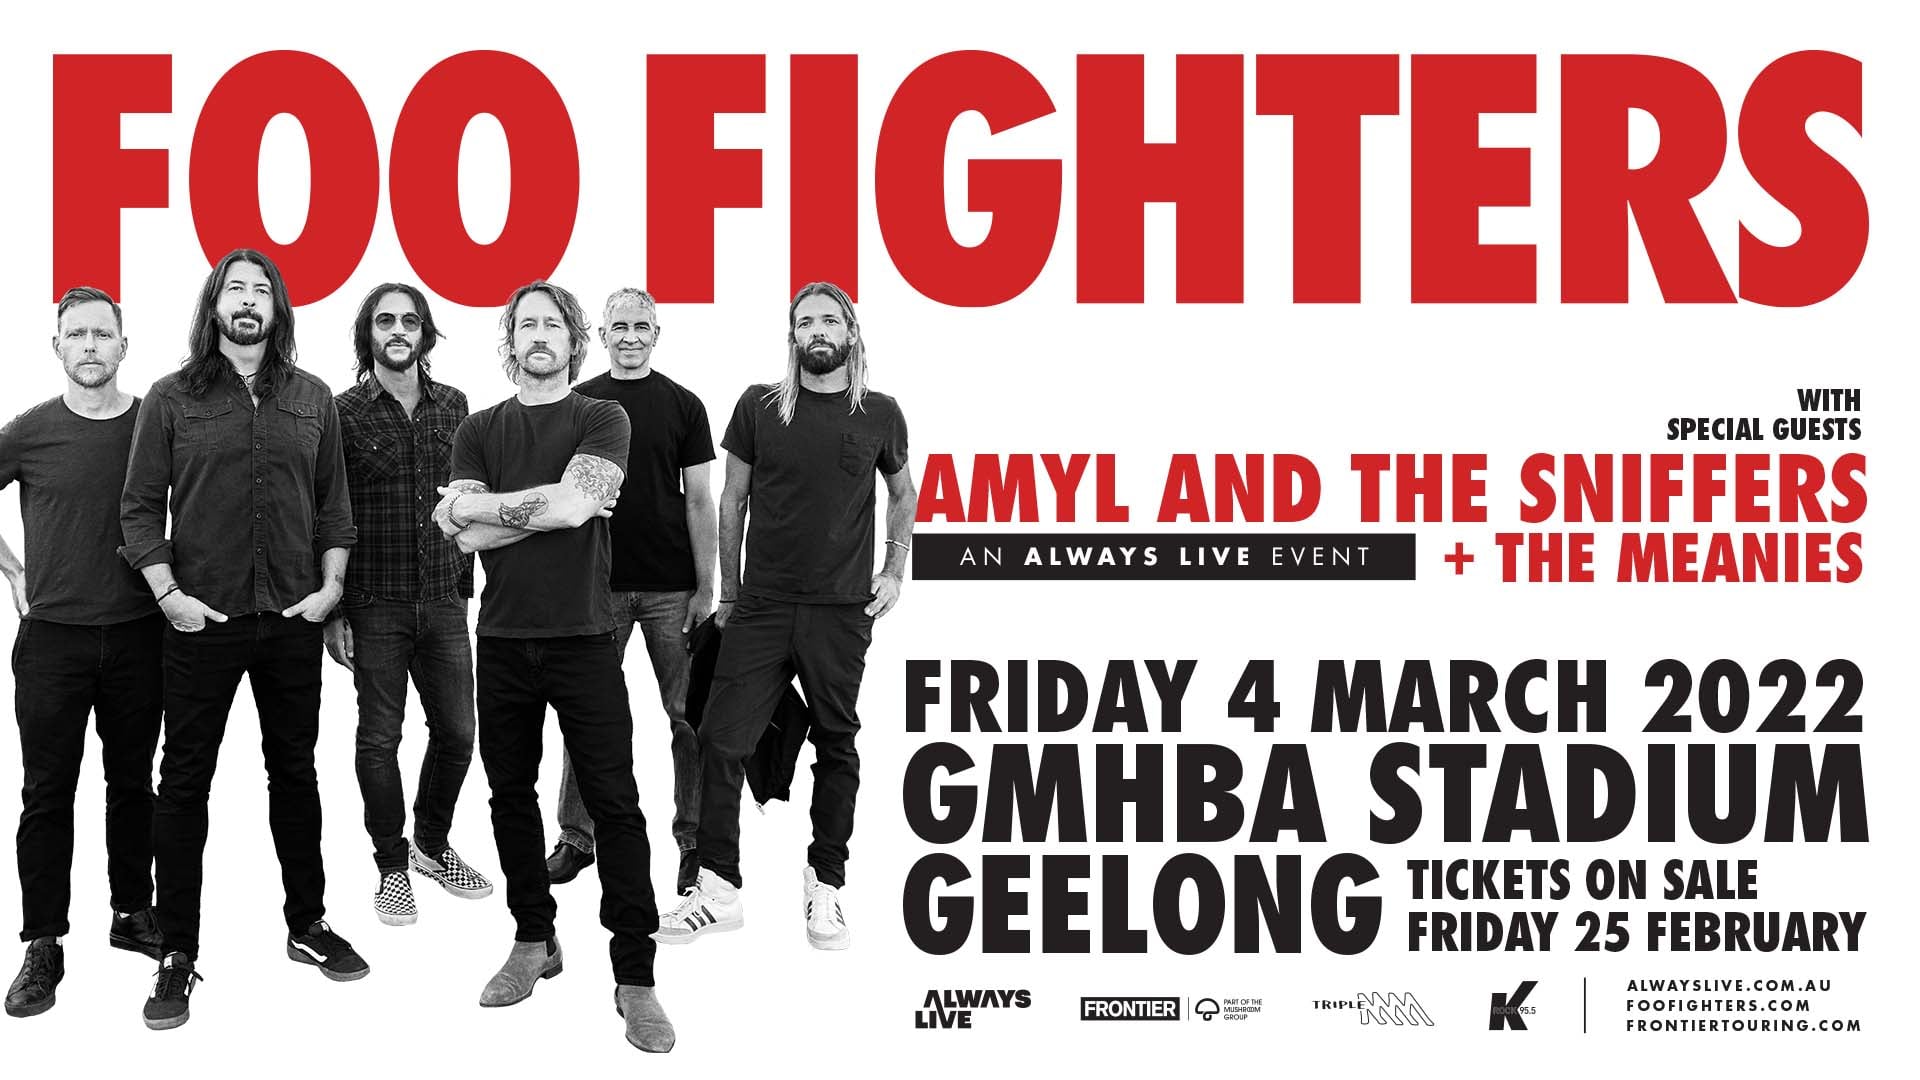 FOO FIGHTERS ONE NIGHT ONLY! PERFORMING AT GMHBA STADIUM GEELONG – FRIDAY 4 MARCH 2022